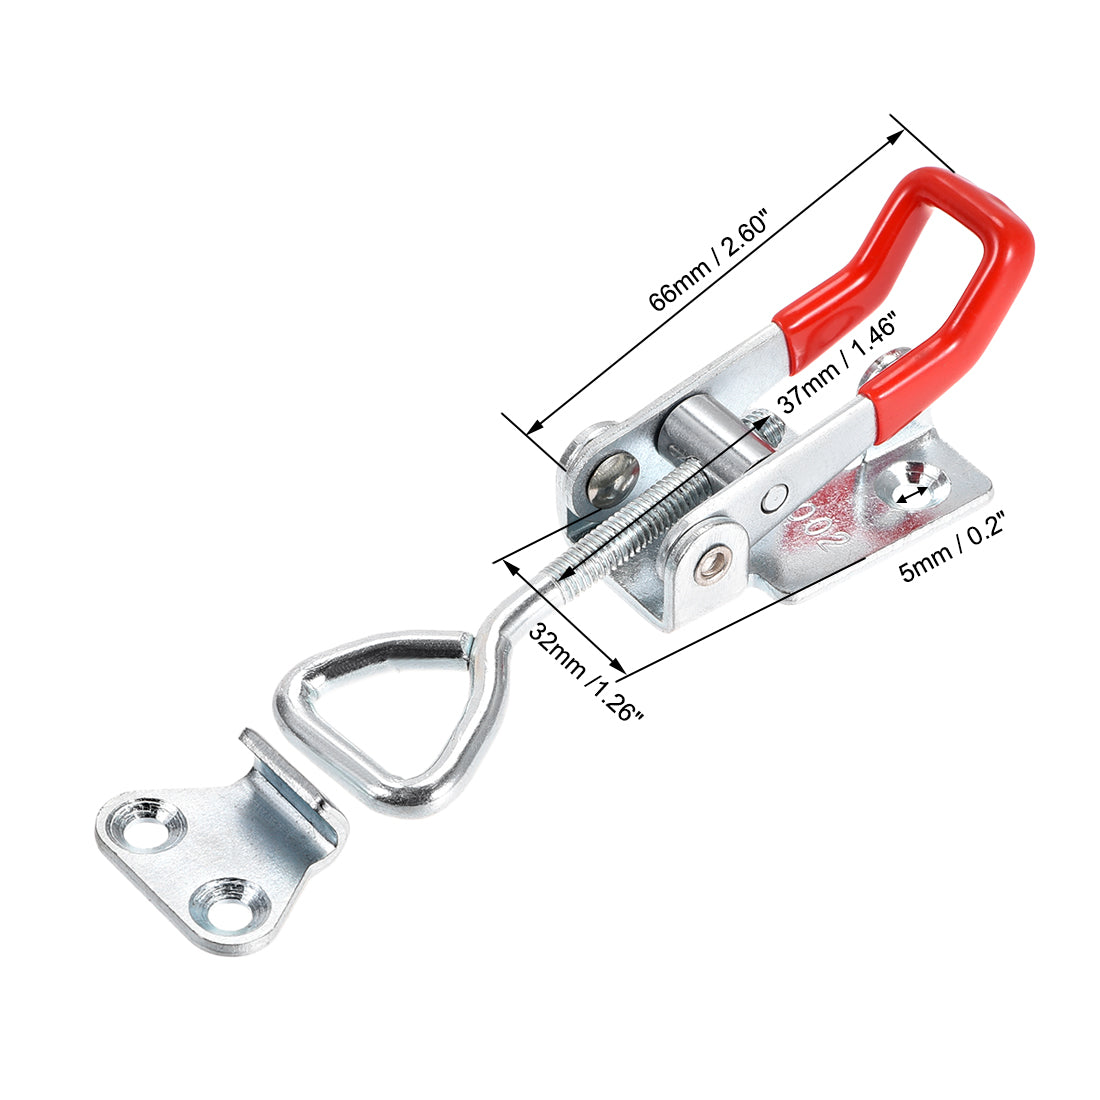 uxcell Uxcell 396lbs Holding Capacity Iron Pull-Action Latch Adjustable Toggle Clamp, 2 Pcs